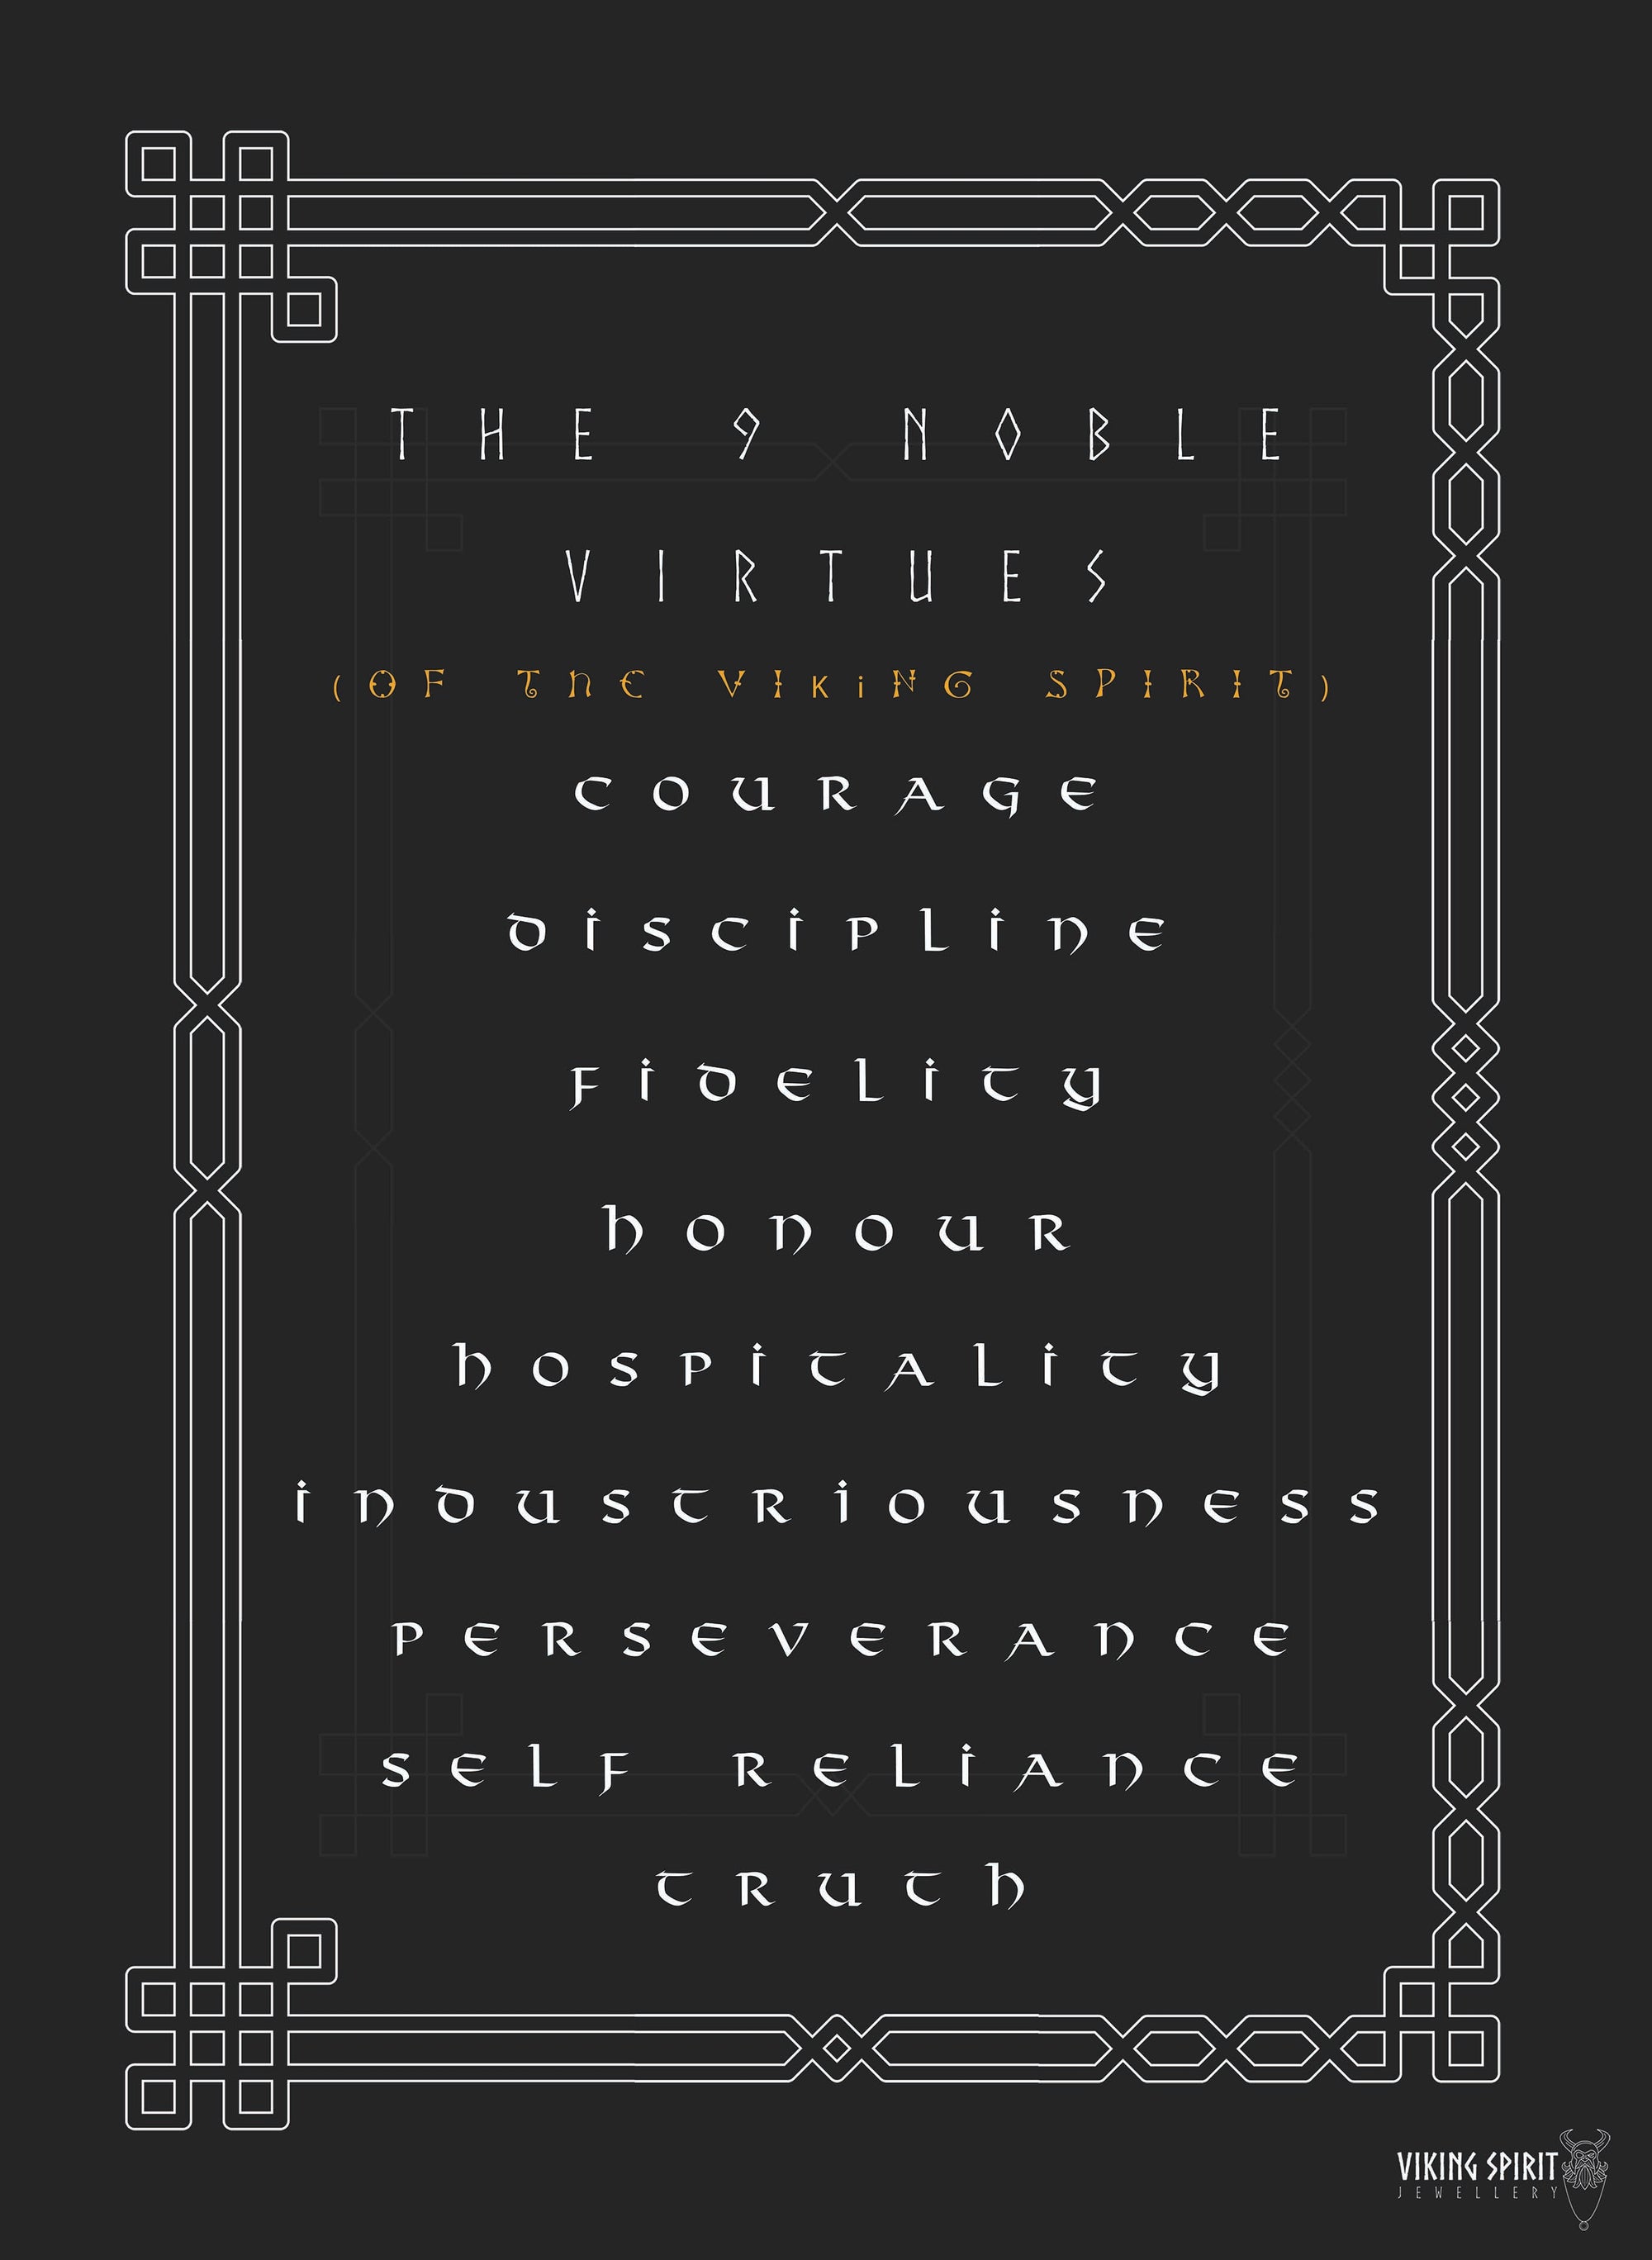 'The 9 Noble Virtues' - Poster Digital Download